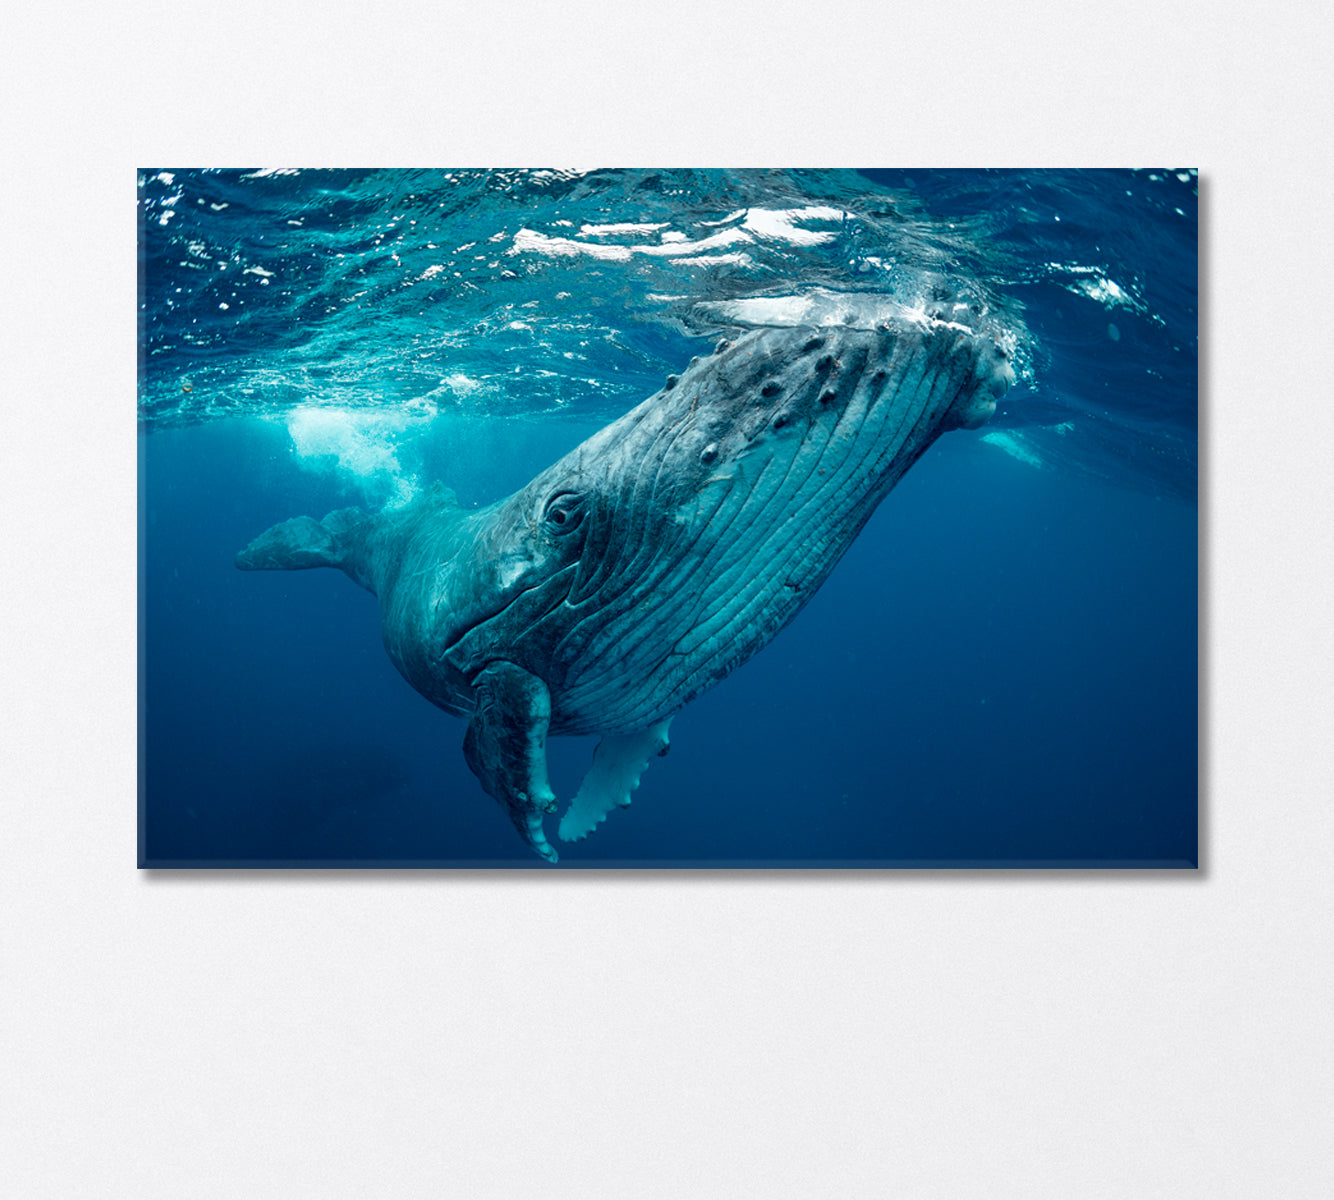 Whale Swimming in the Pacific Ocean Canvas Print-Canvas Print-CetArt-1 Panel-24x16 inches-CetArt